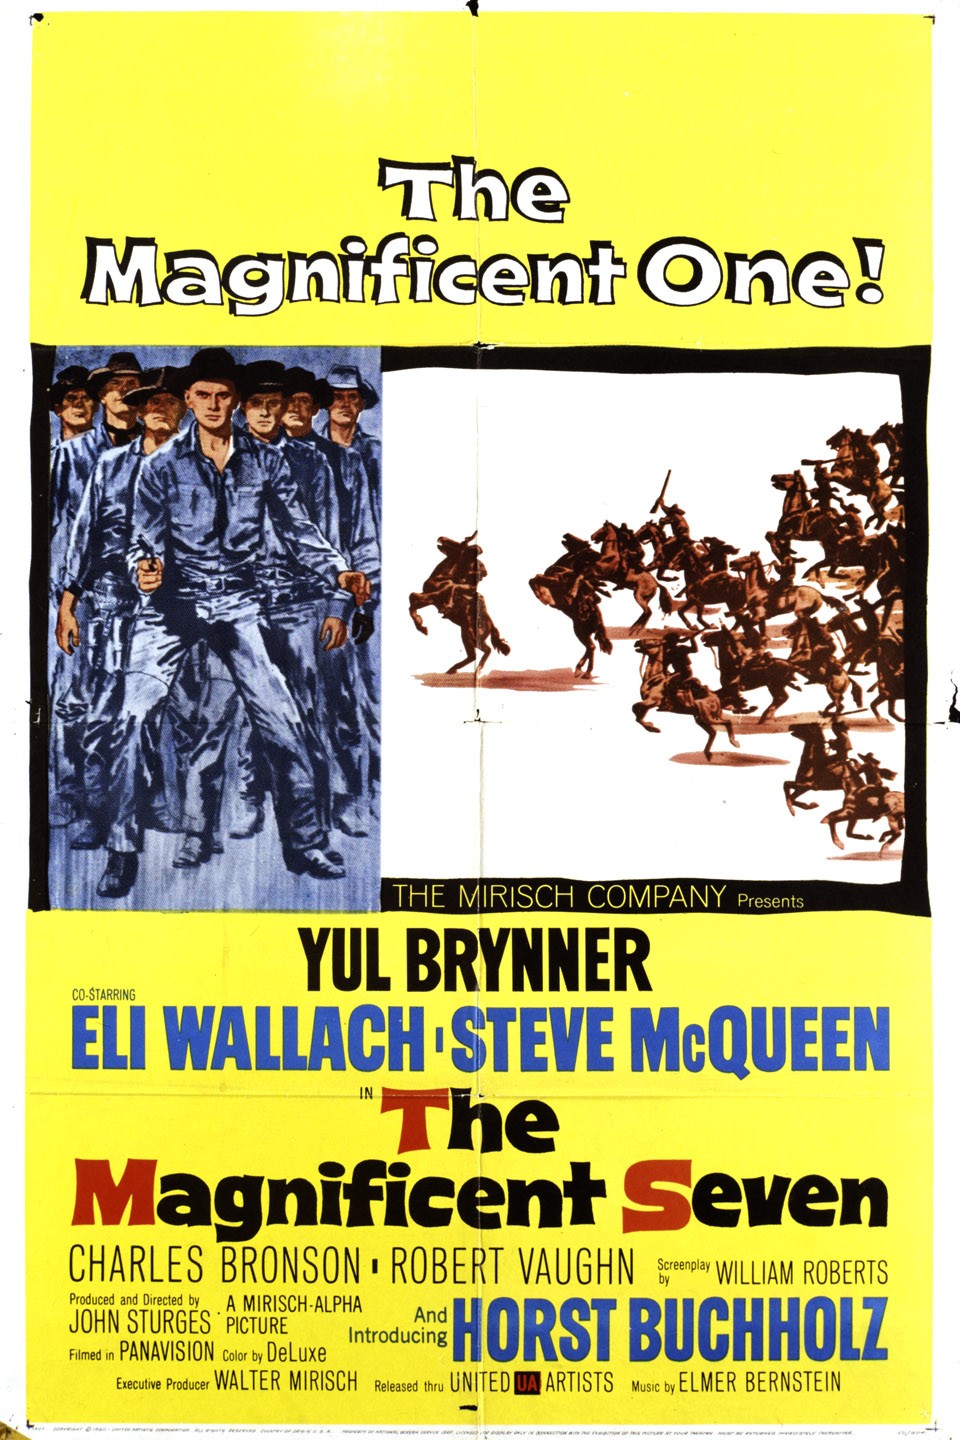 The Magnificent Seven - Rotten Tomatoes